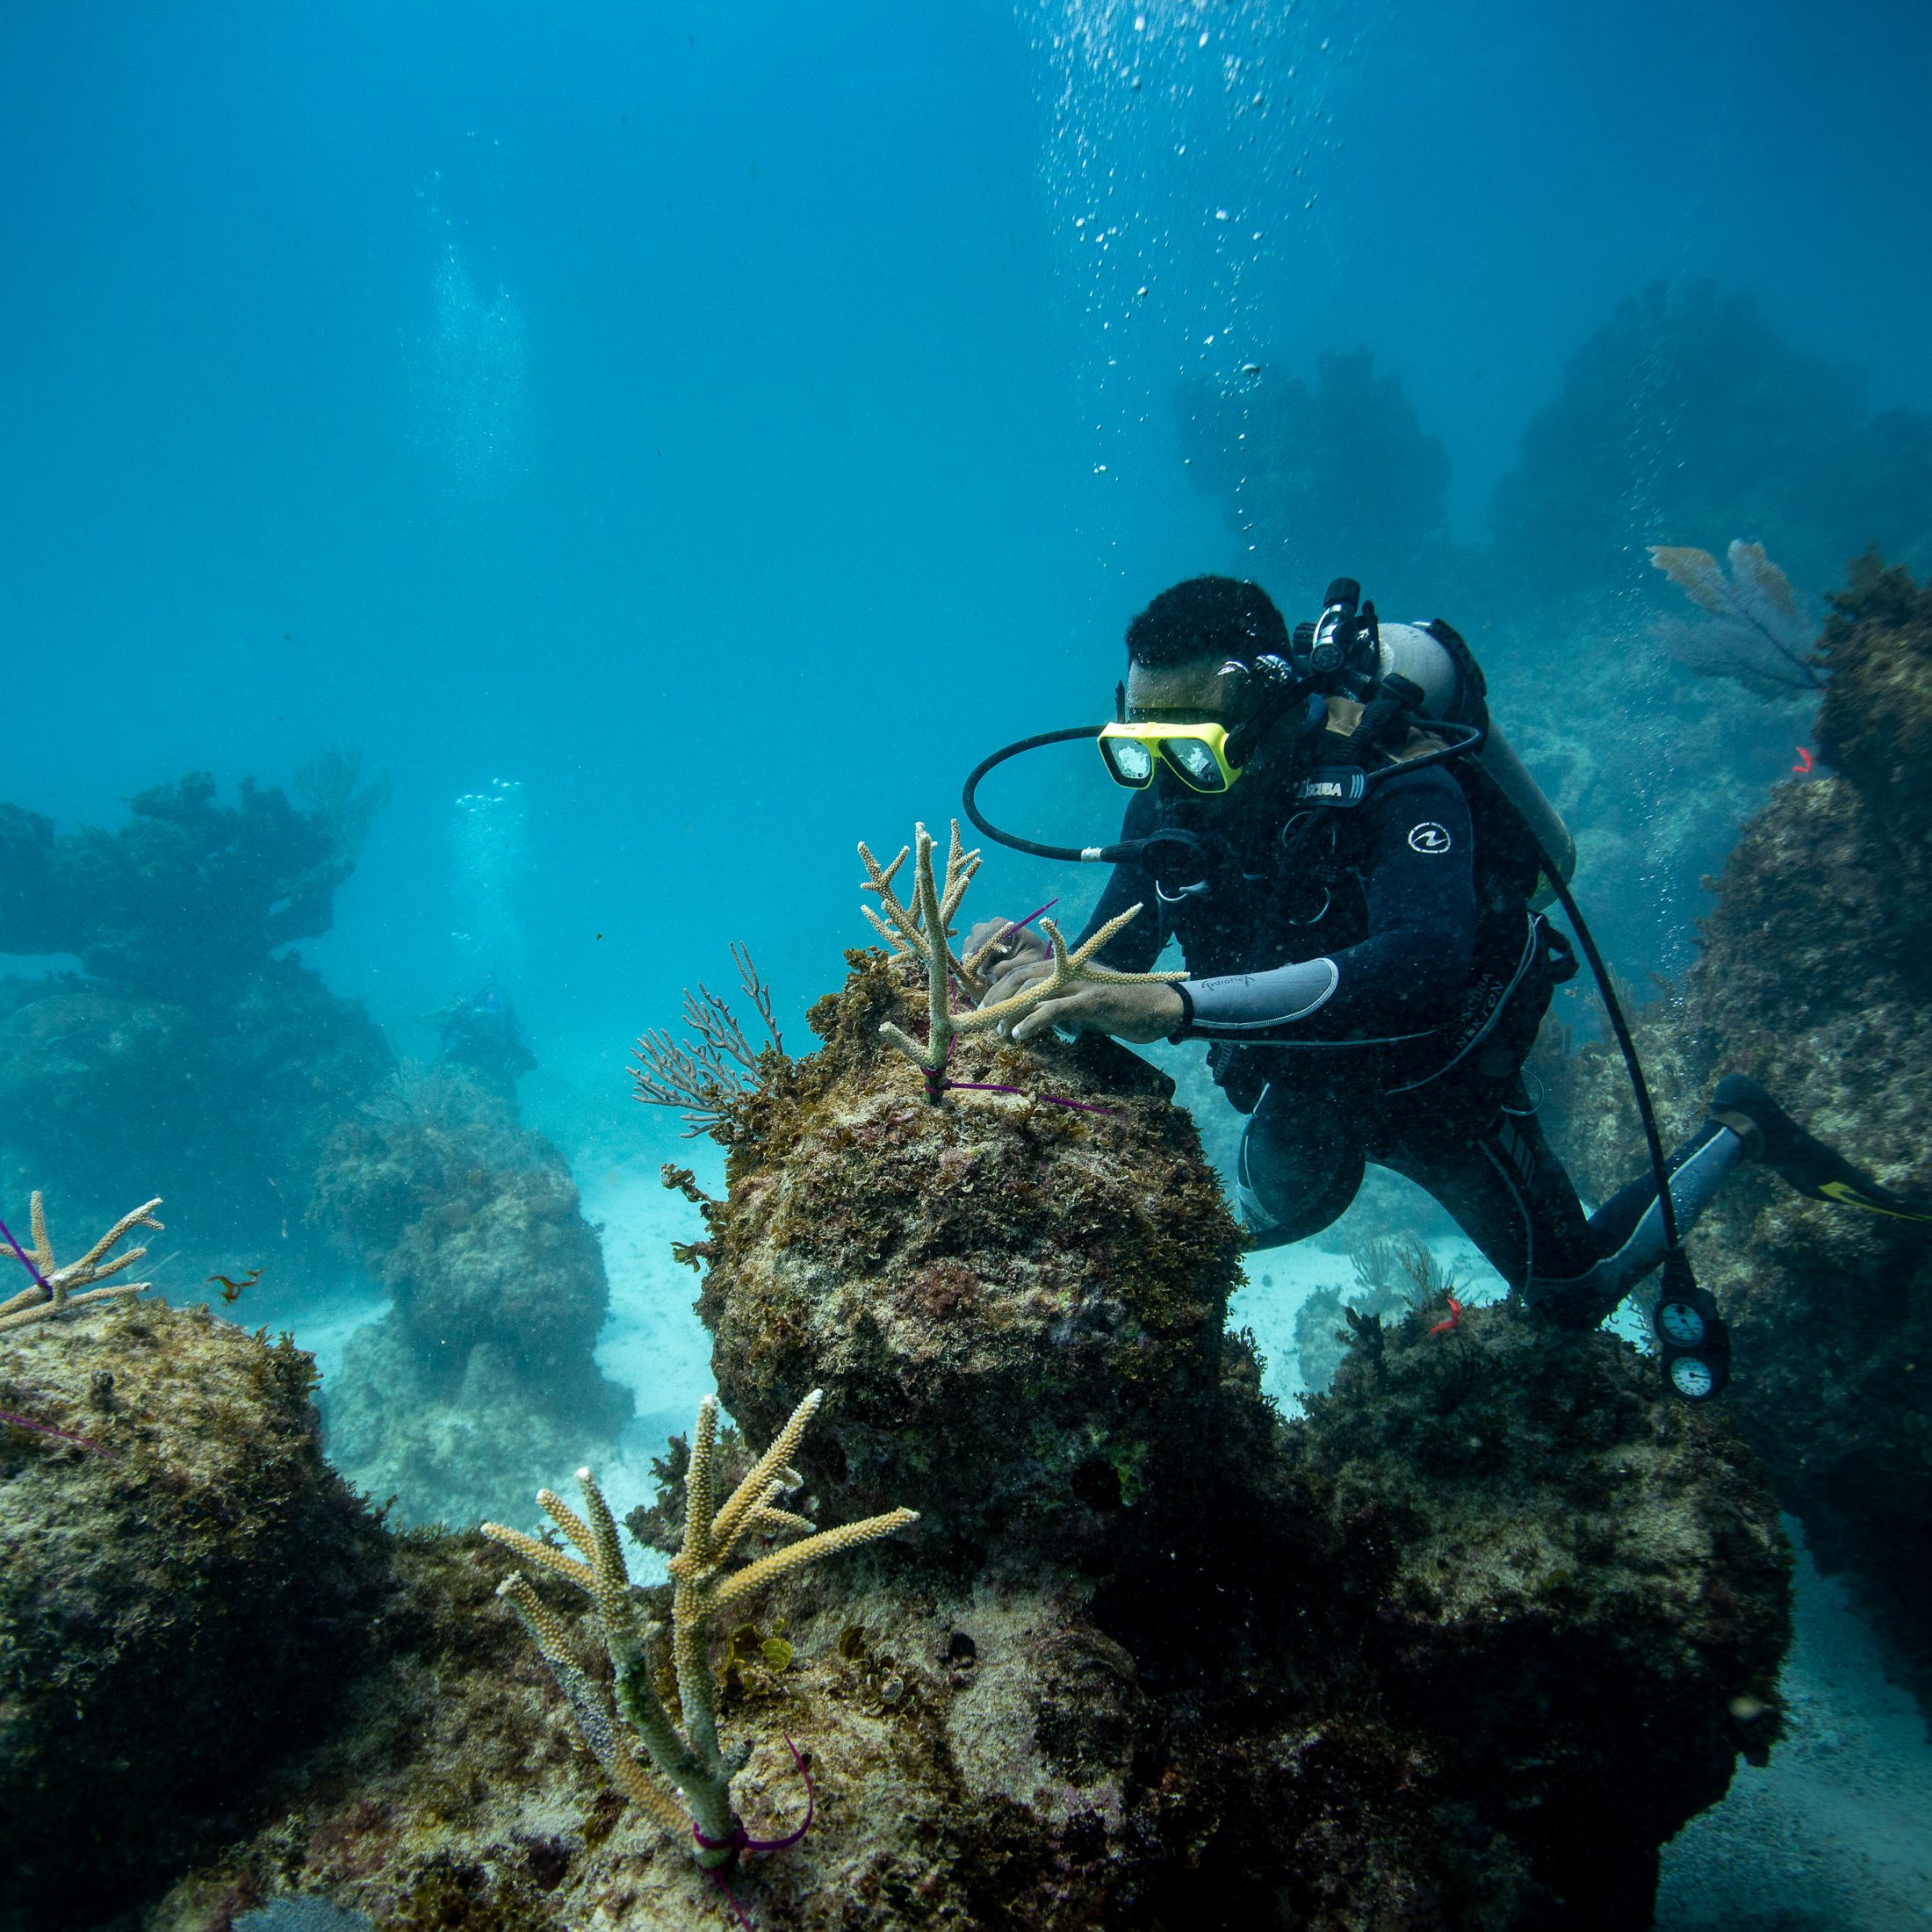 A scuba diver attaches pieces of coral to a coral-covered rock.